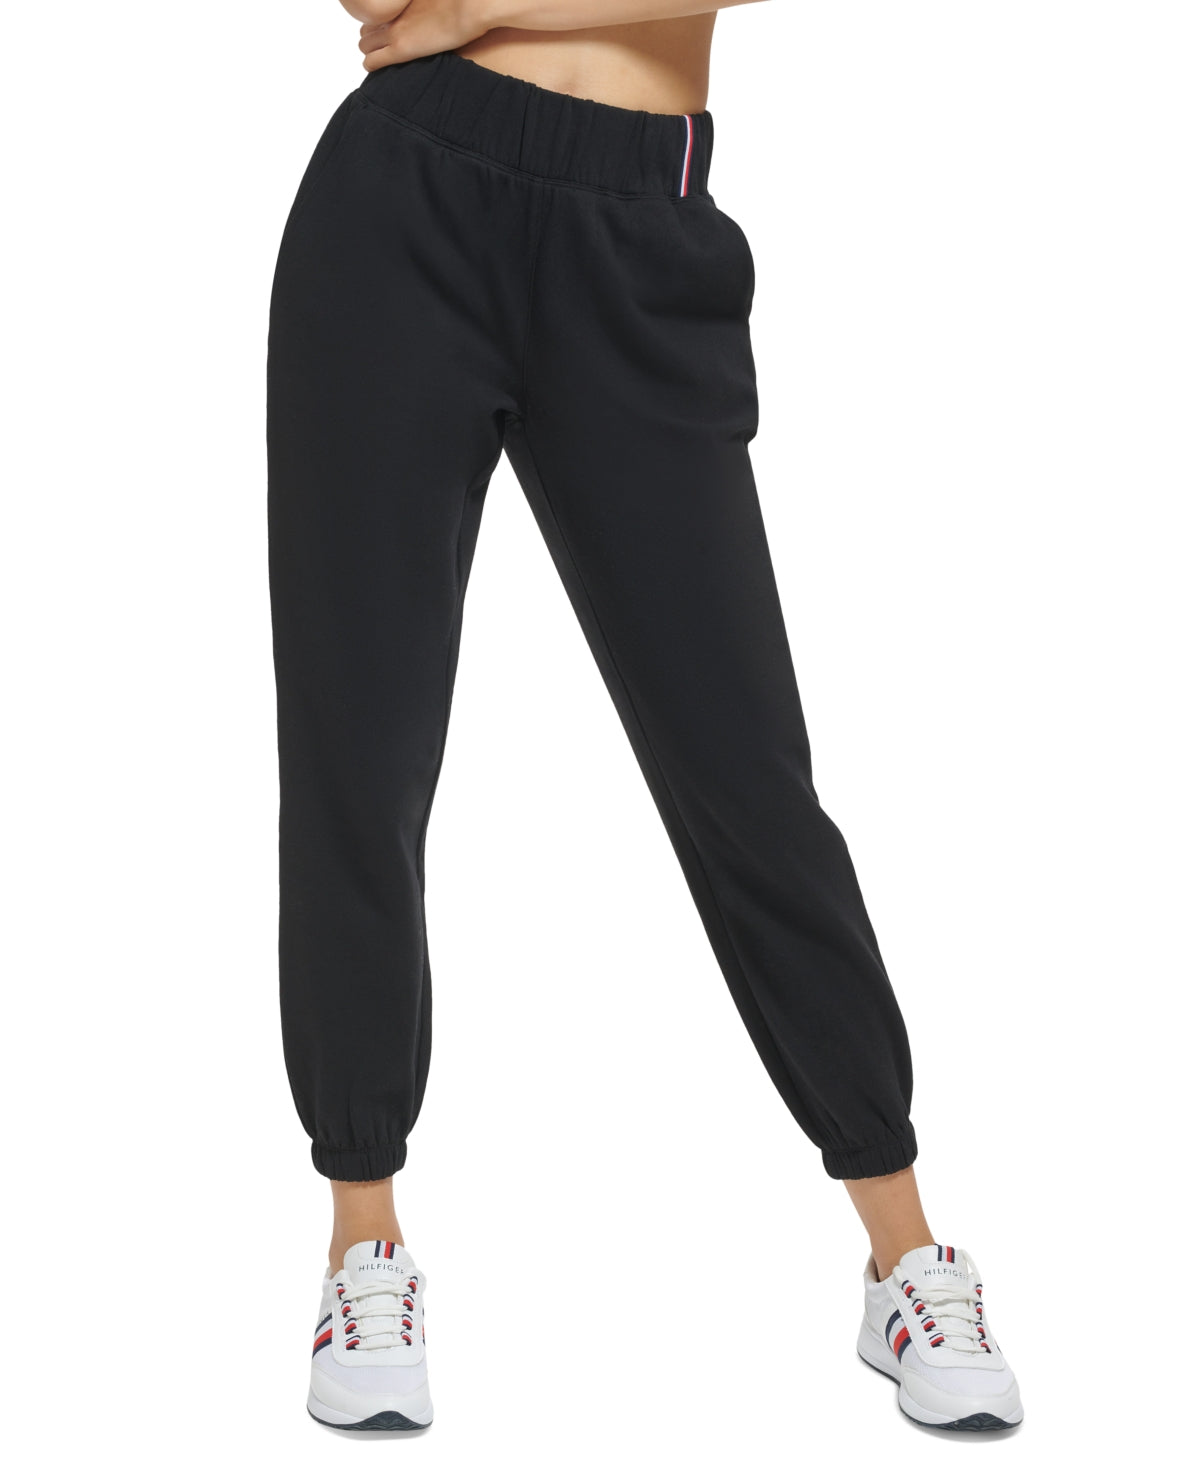 Tommy Hilfiger Sport Women's Relaxed Fit Pull-On Logo Sweatpants